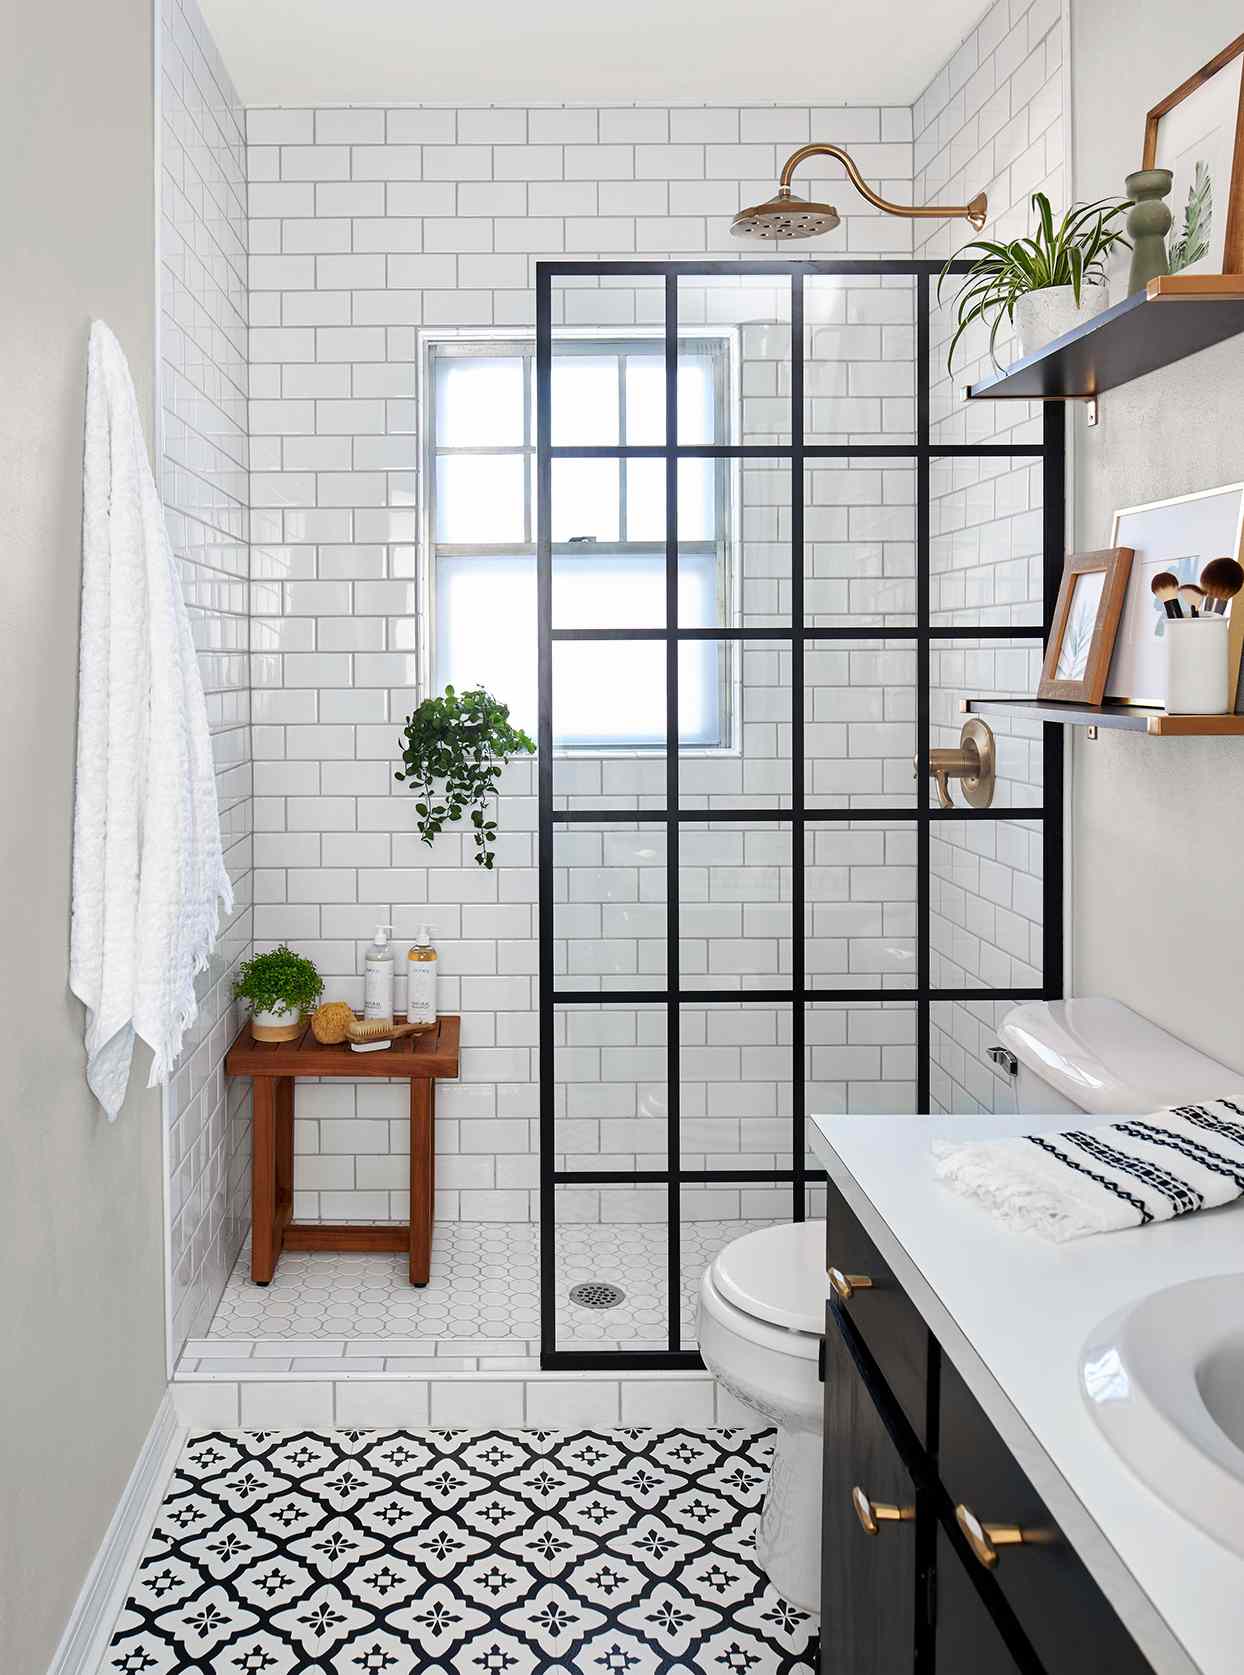 Before-and-After Small Bathroom Remodels That Showcase Stylish  Budget-Friendly Ideas | Better Homes &amp; Gardens